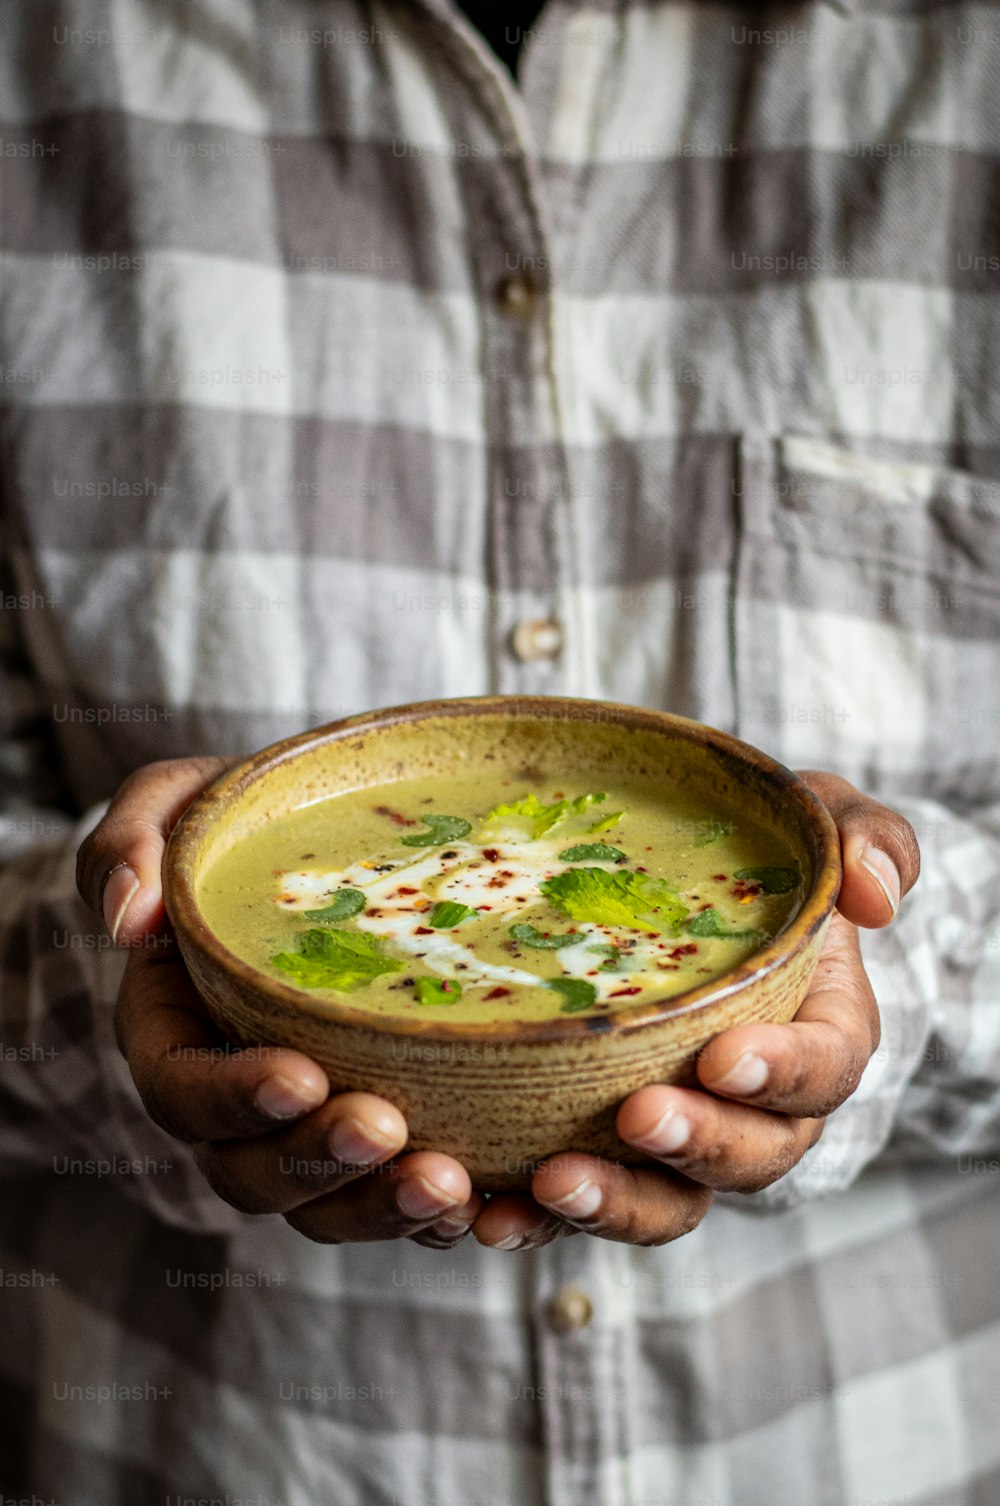 a man holding a bowl of soup in his hands